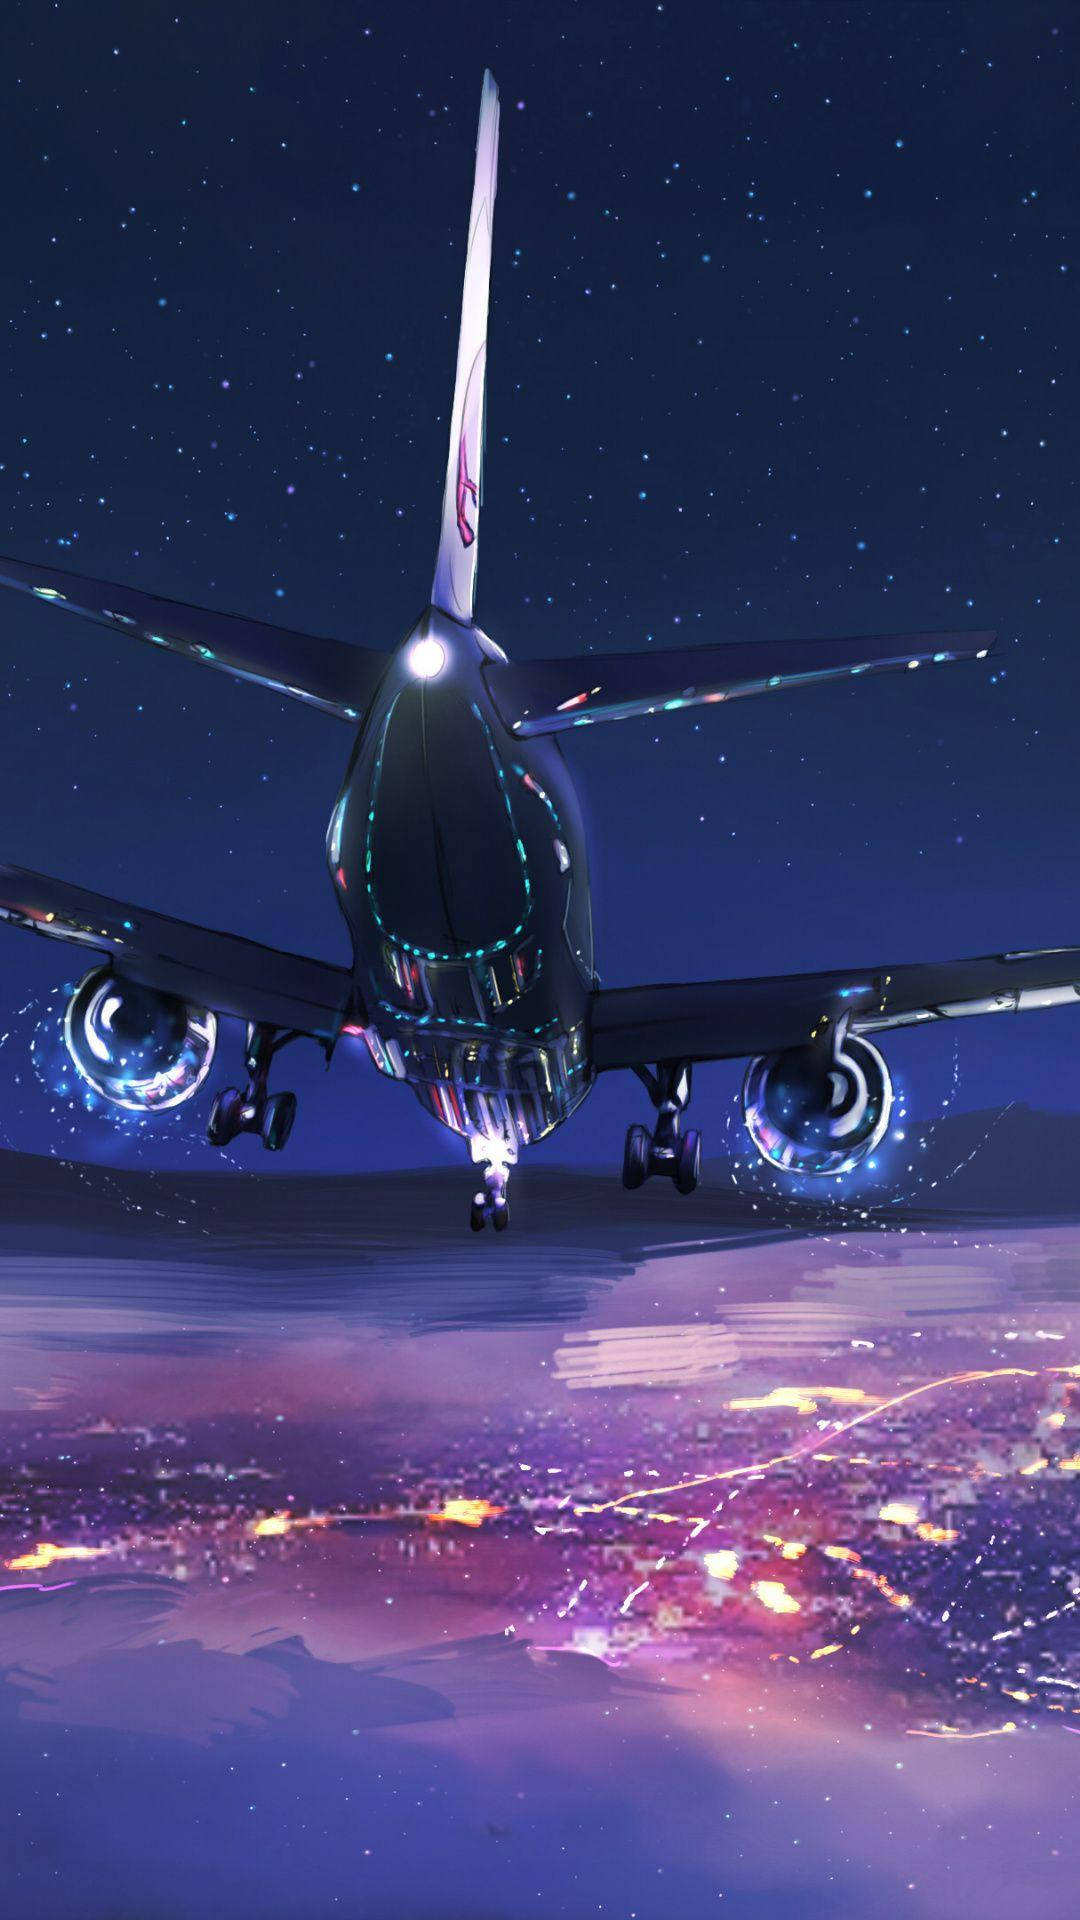 Landing Airplane Android With City Lights